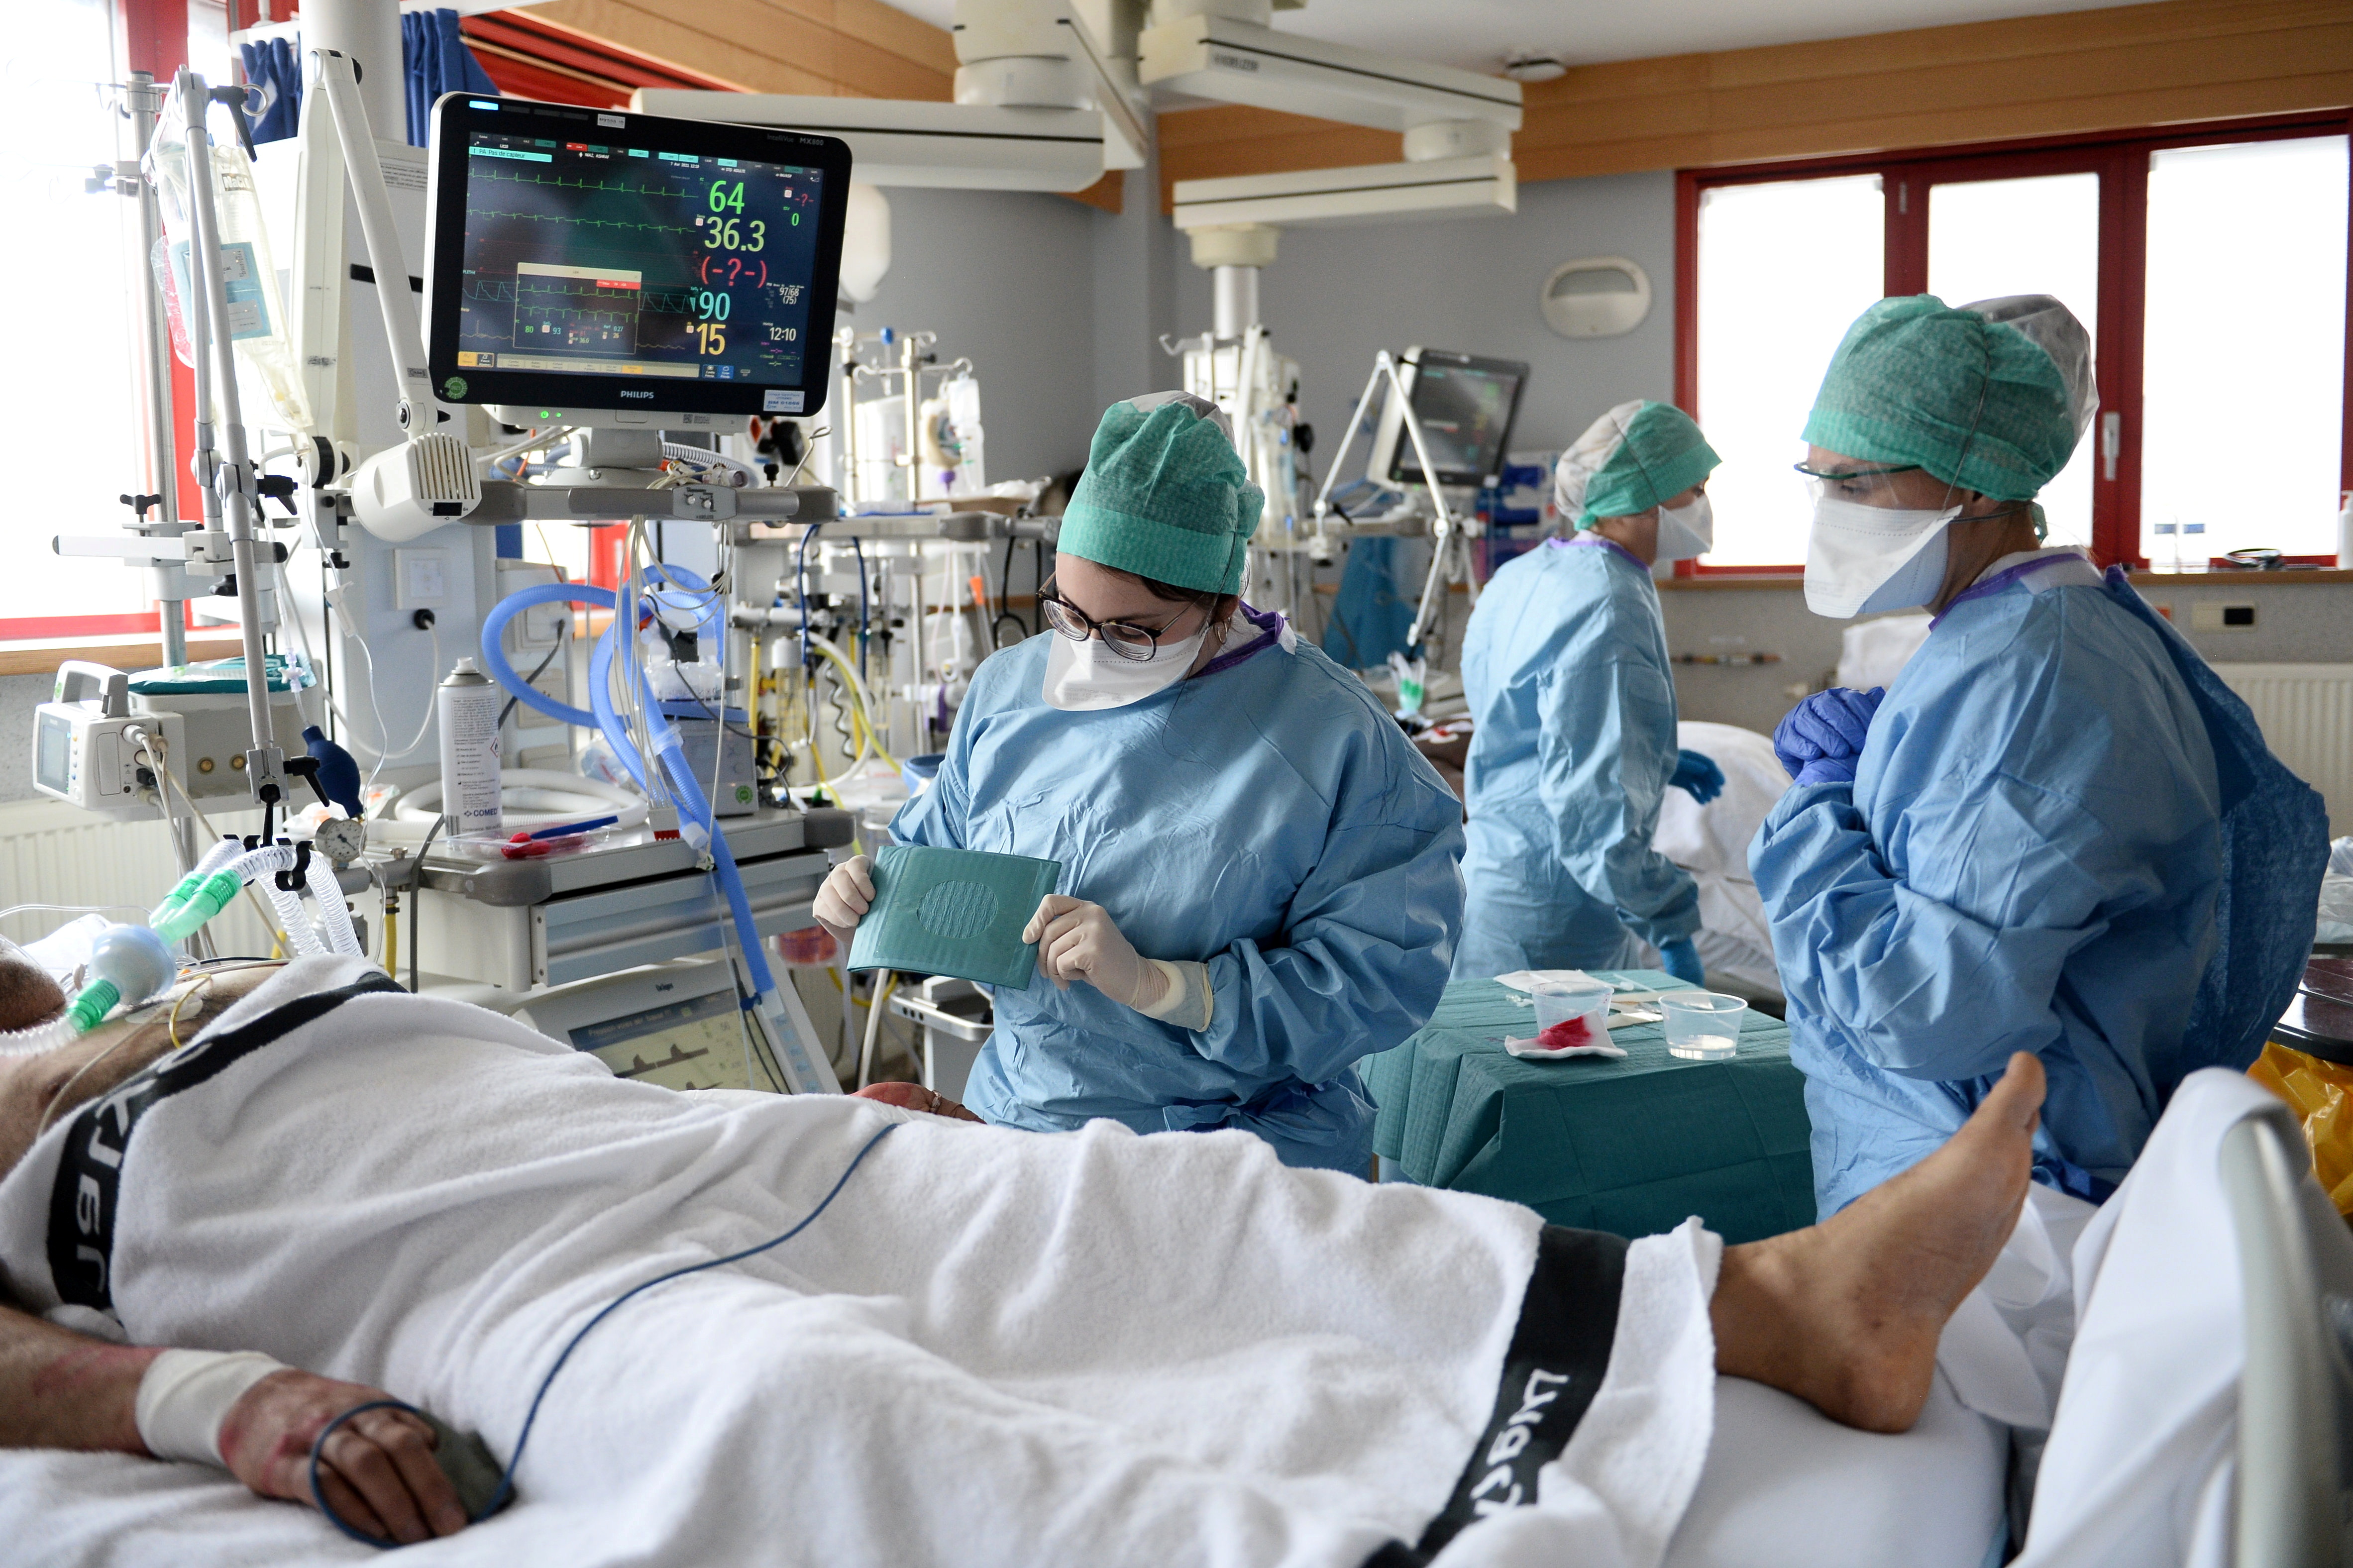 Medical workers work in the Intensive Care Unit (ICU) where patients suffering from the coronavirus disease (COVID-19) are treated at the Saint-Pierre clinic in Ottignies, Belgium